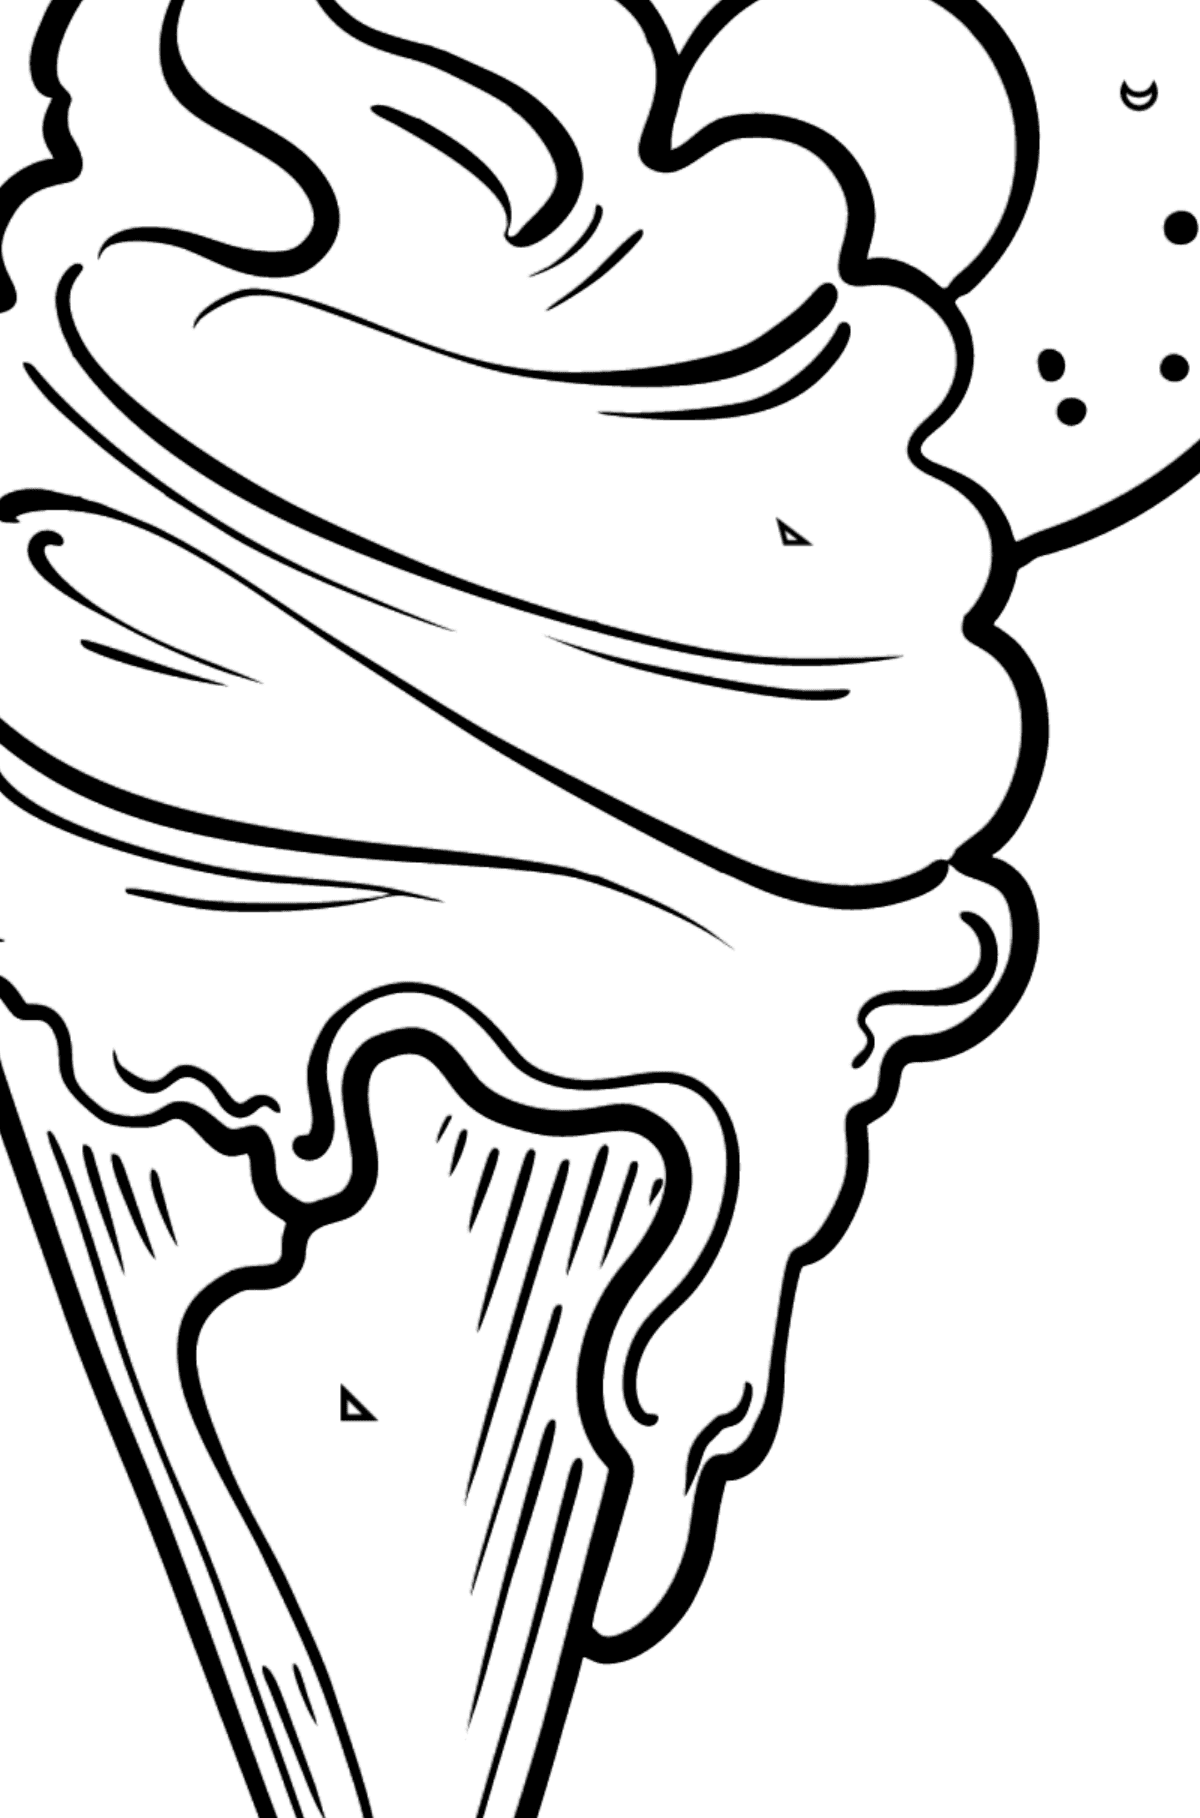 Ice Cream Cone and Pink Lollipop coloring page - Coloring by Geometric Shapes for Kids